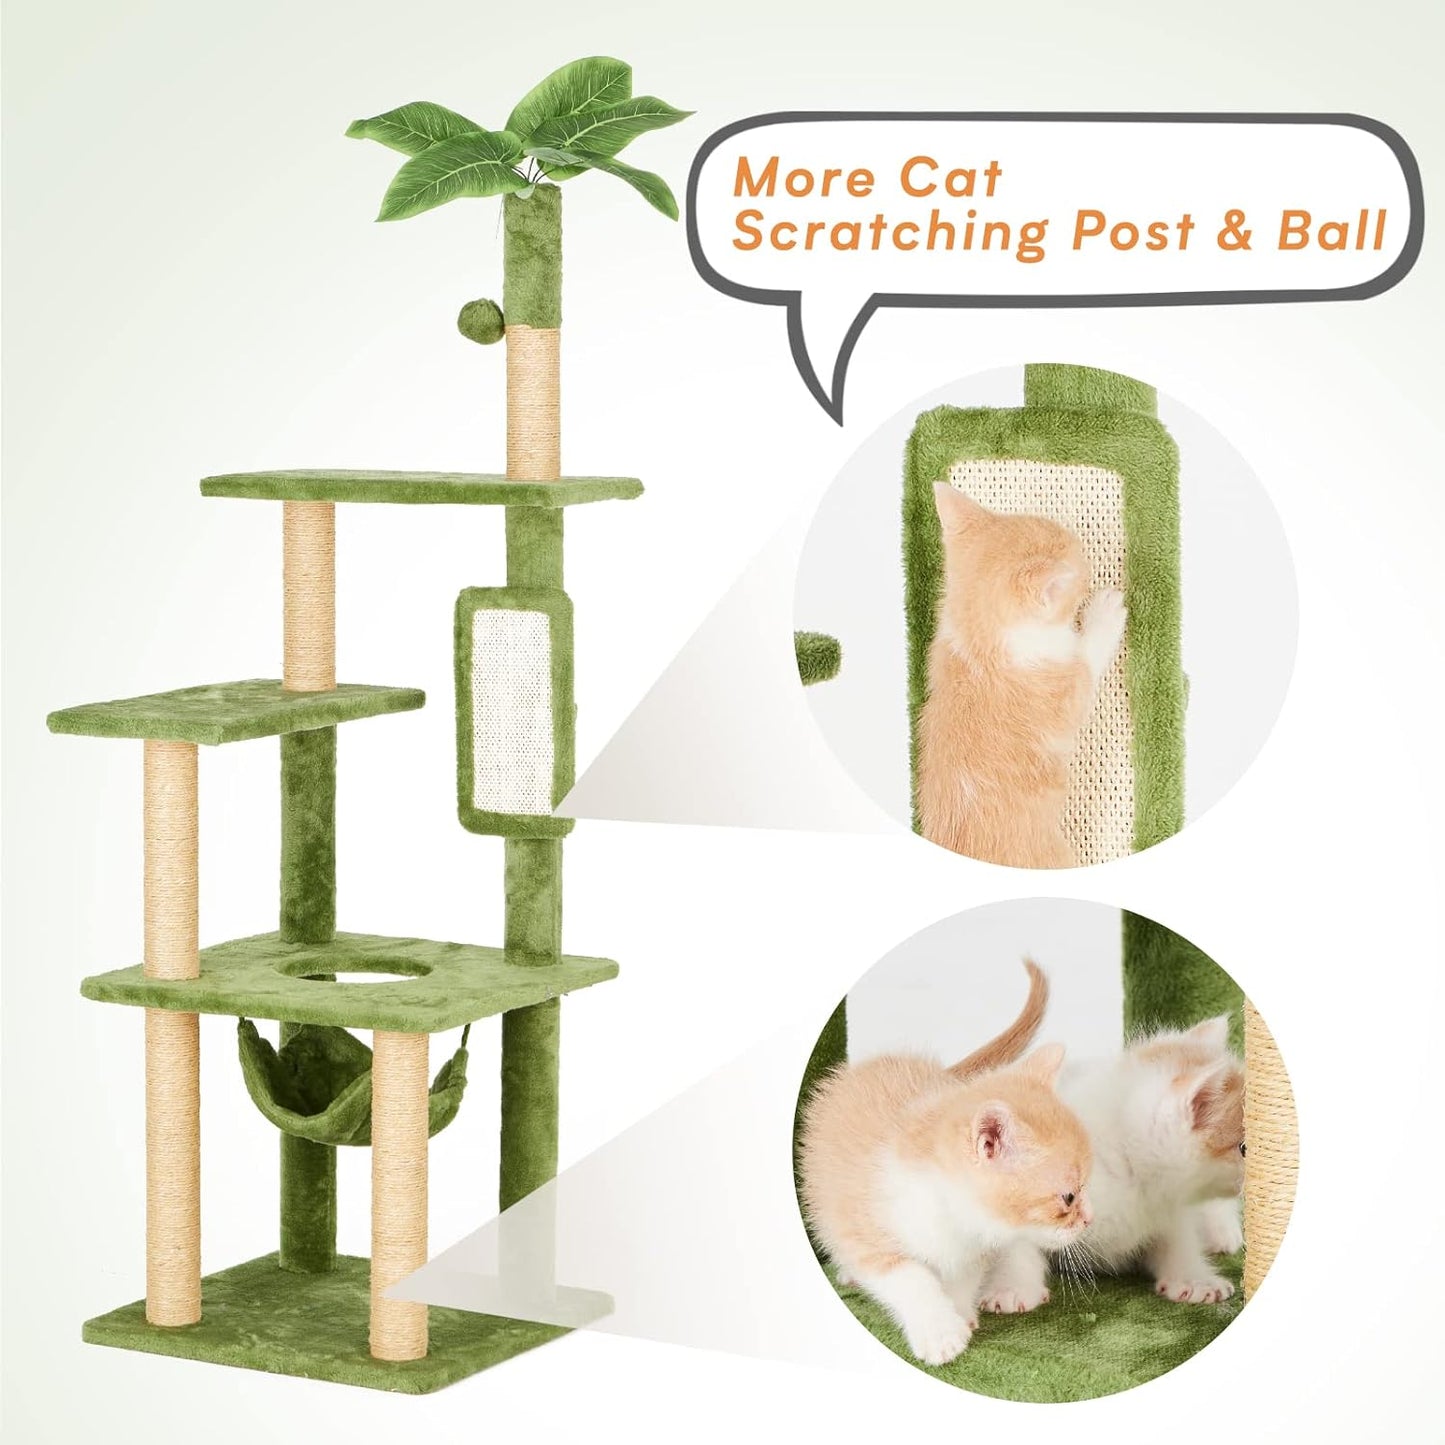 TSCOMON 55" Cat Tree for Indoor Cats with Green Leaves, Multi-Level Large Cat Tower with Hammock, Plush Cat House with Hang Ball Toy and Cat Sisal Scratching Posts Furniture, Green